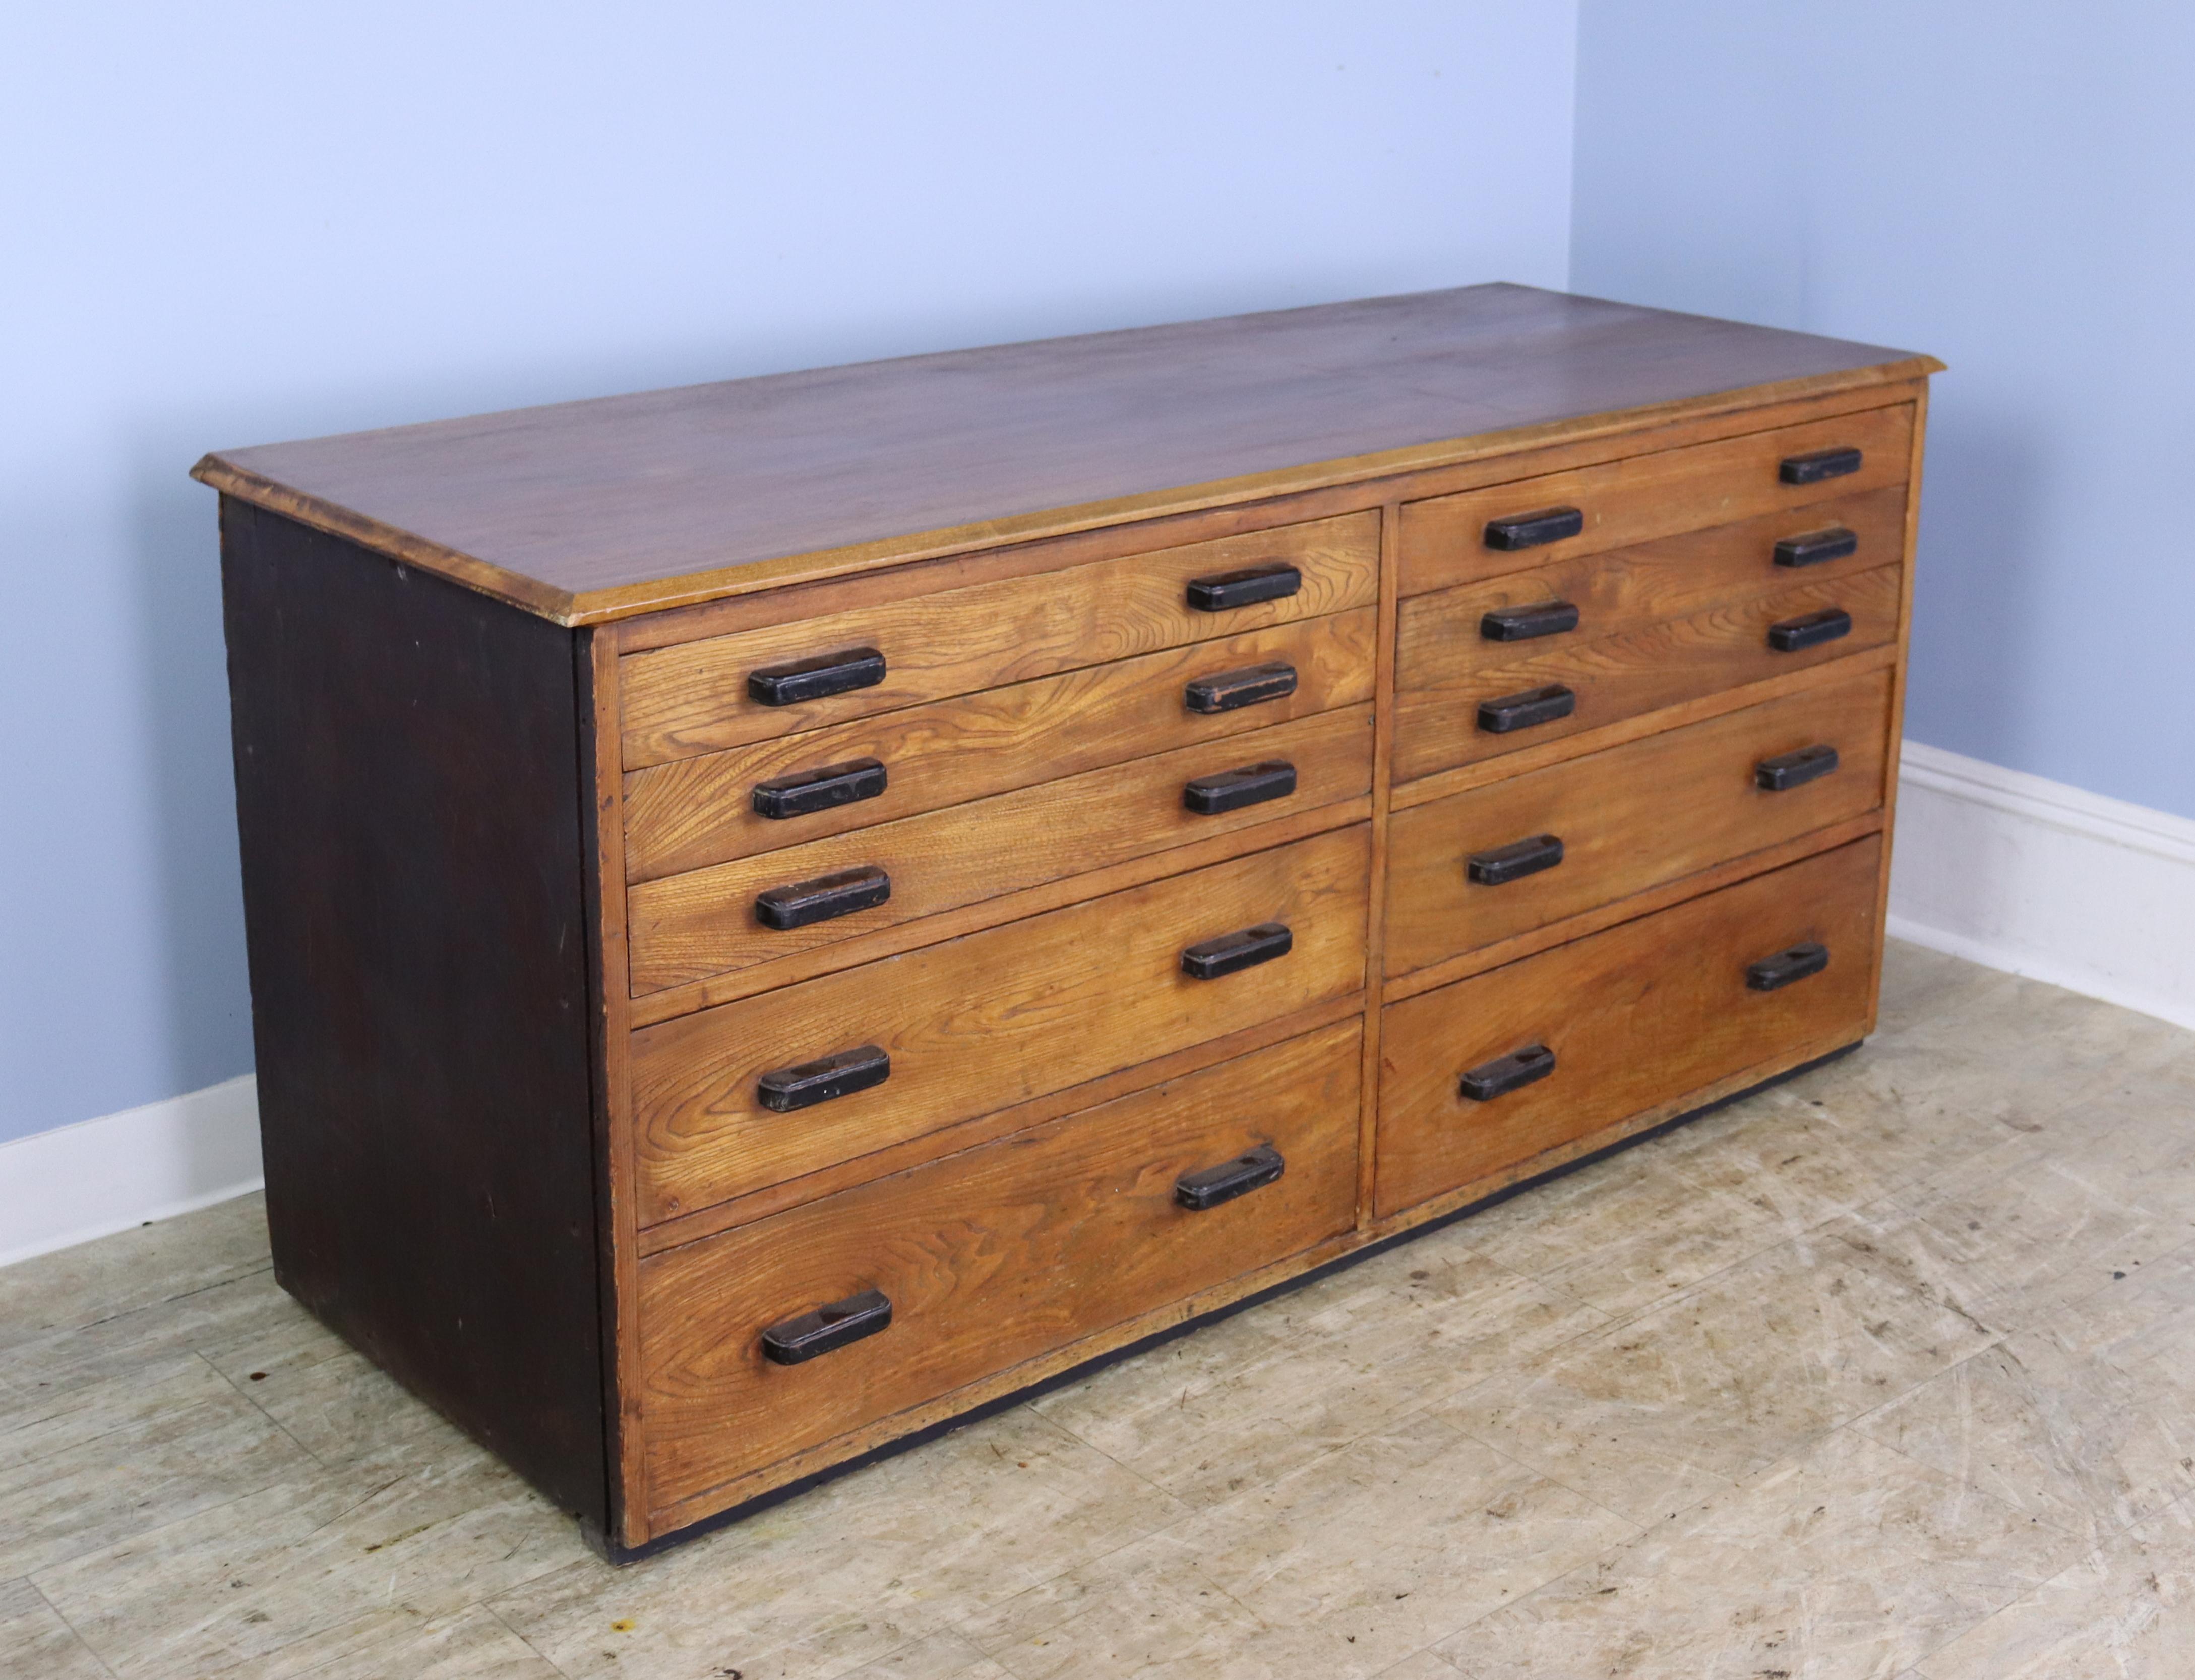 An industrial oak chest or cabinet from 1940's England.  We believe the grooves on the front and back interior of each drawer, shown in thumbnails, may speak to the piece's past as a typesetting cabinet, map or printer's cabinet, blueprint cabinet